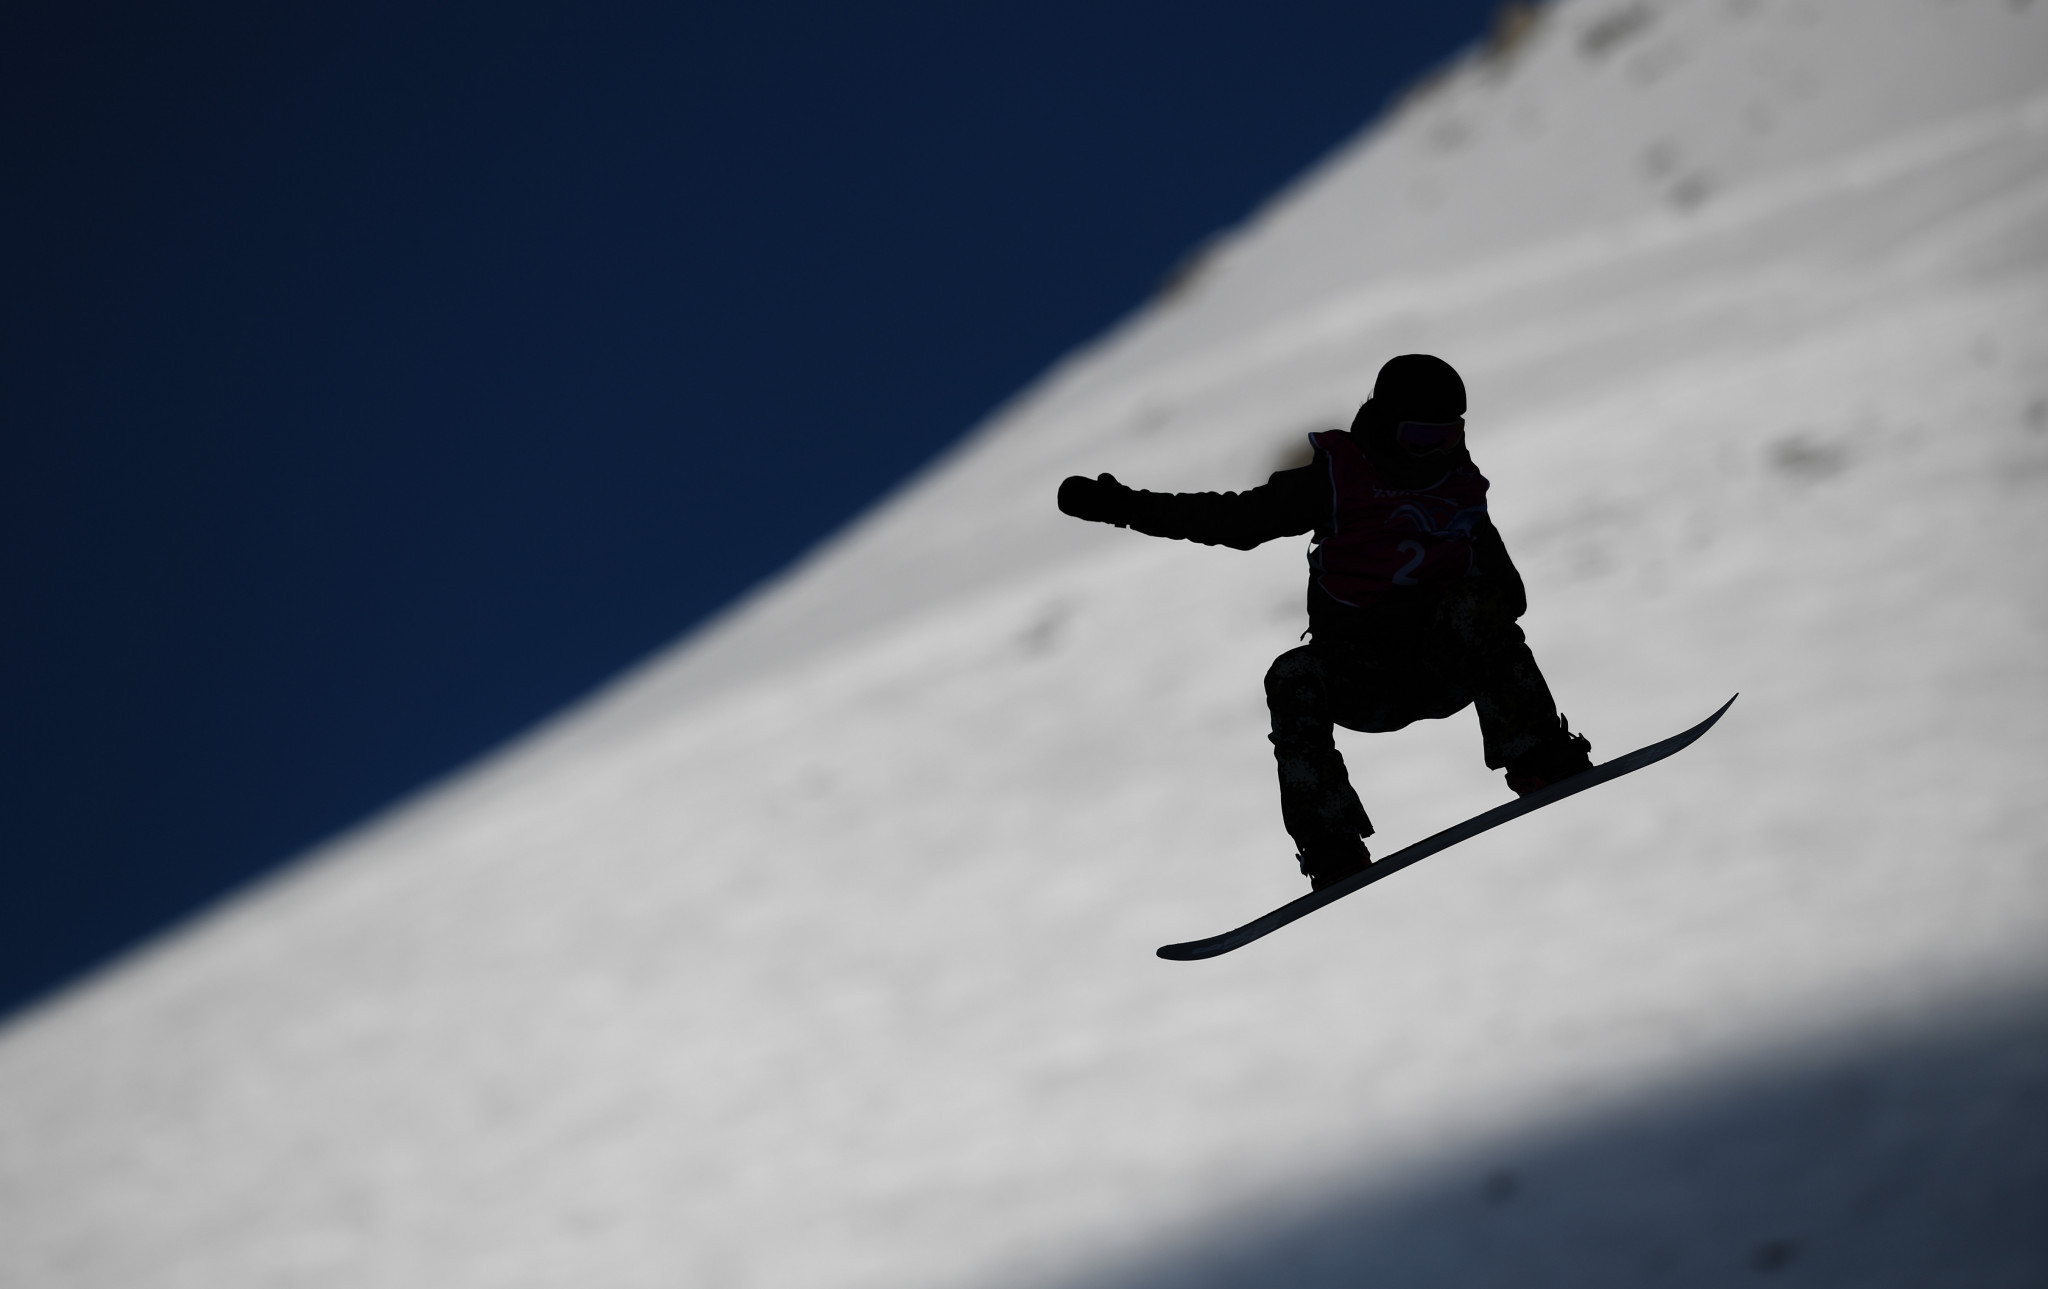 Belgium's Evy Poppe won the women's snowboard slopestyle with the final run ©Getty Images